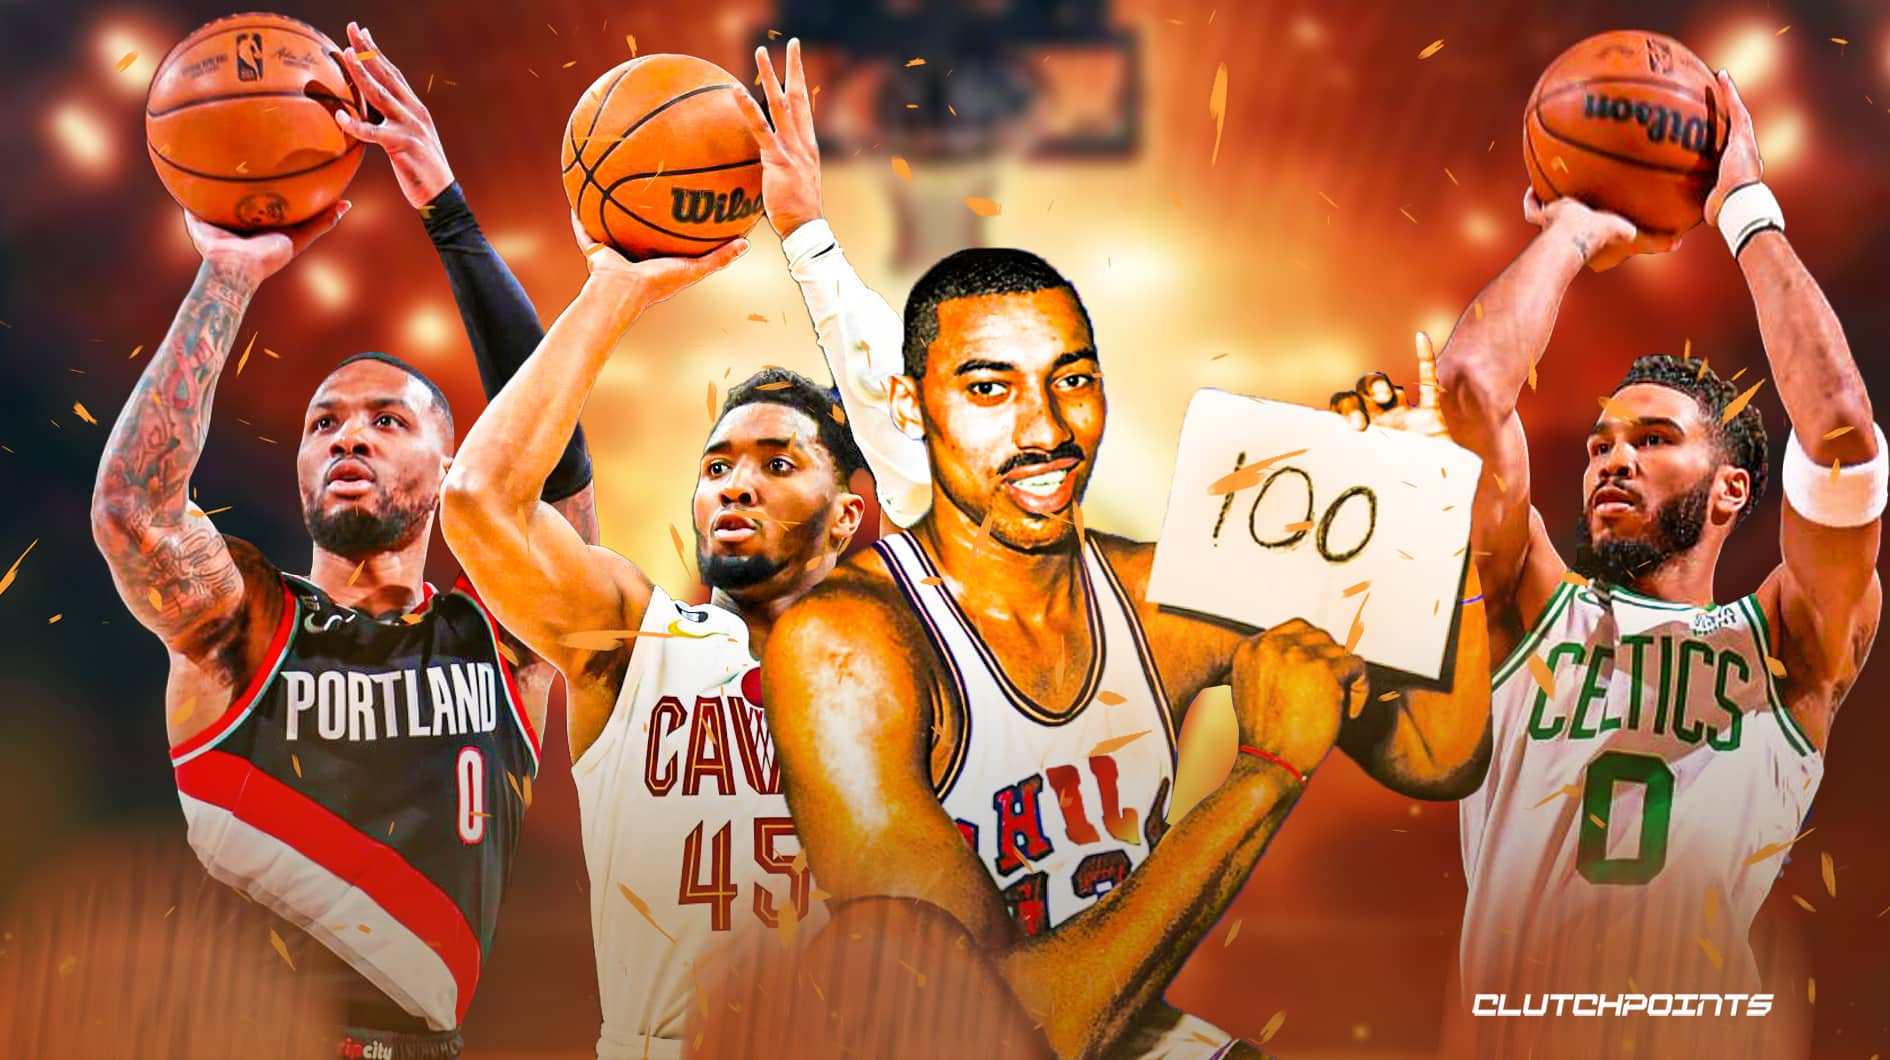 6 NBA players with best chance of breaking record, ranked